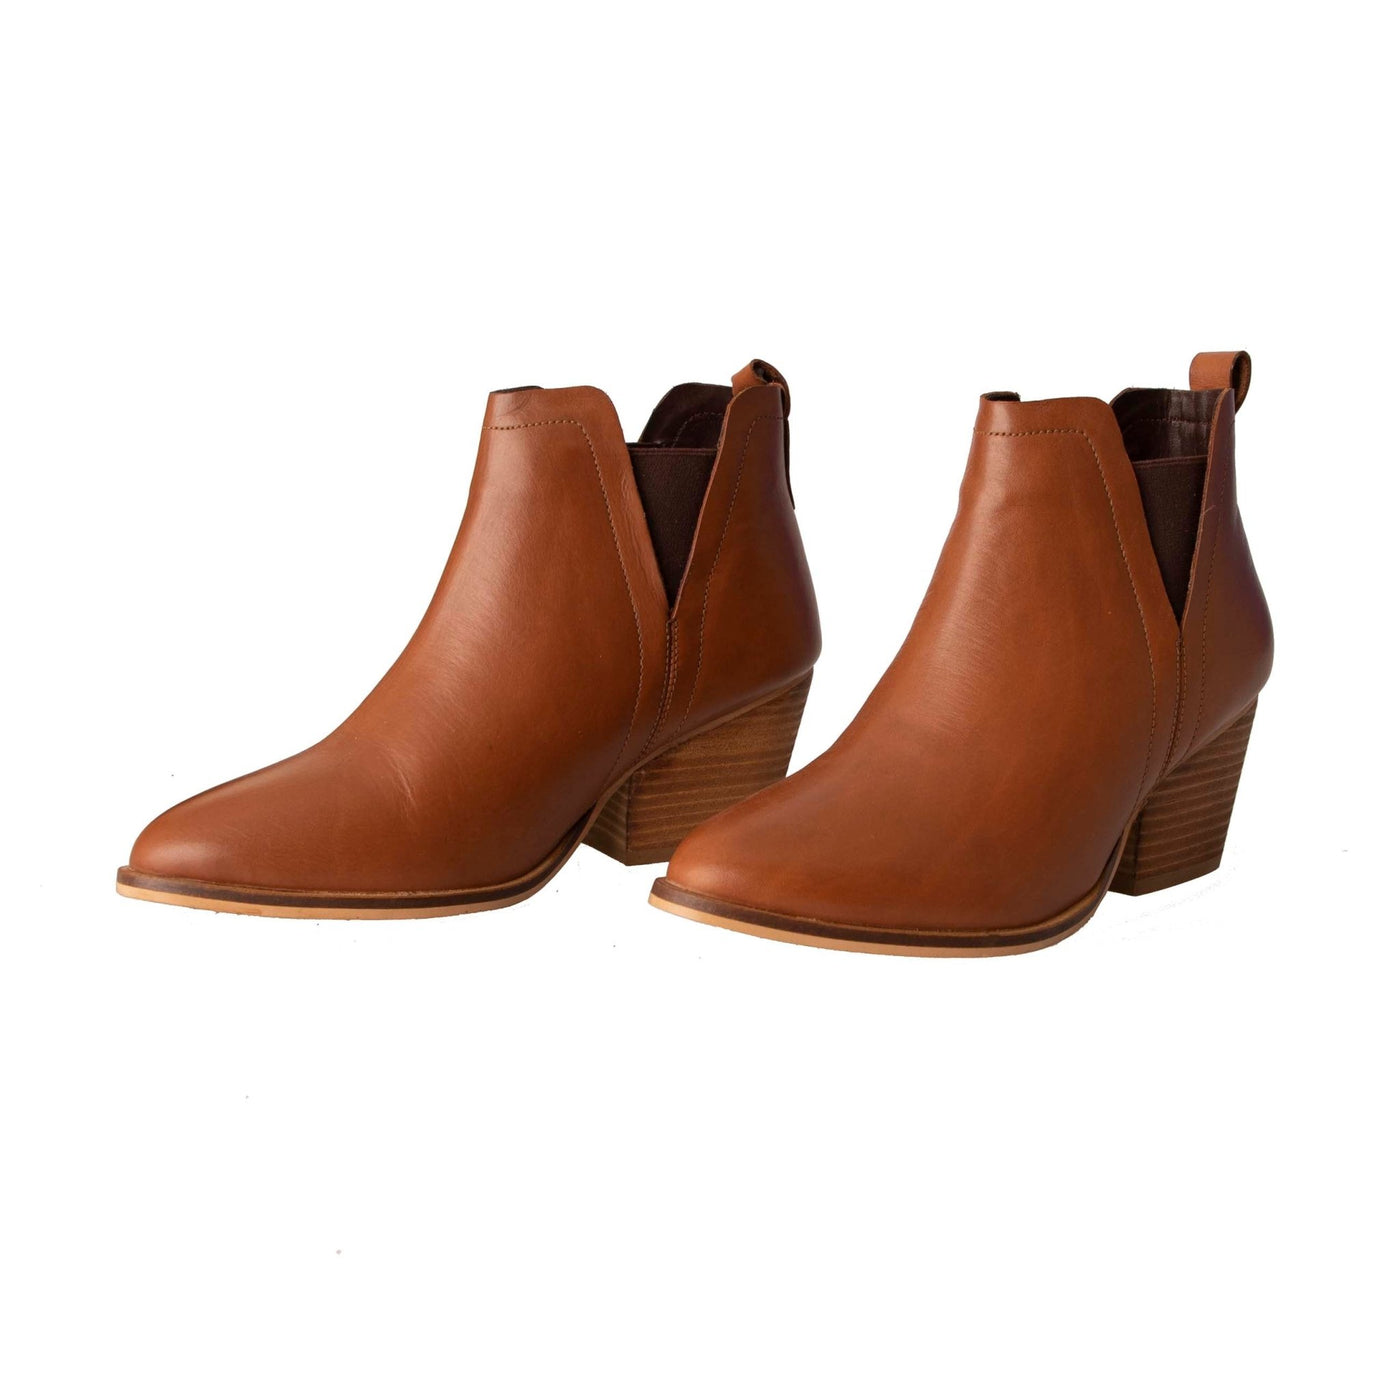 Human Shoes Thea Ankle Boot in Tan - Hey Sara